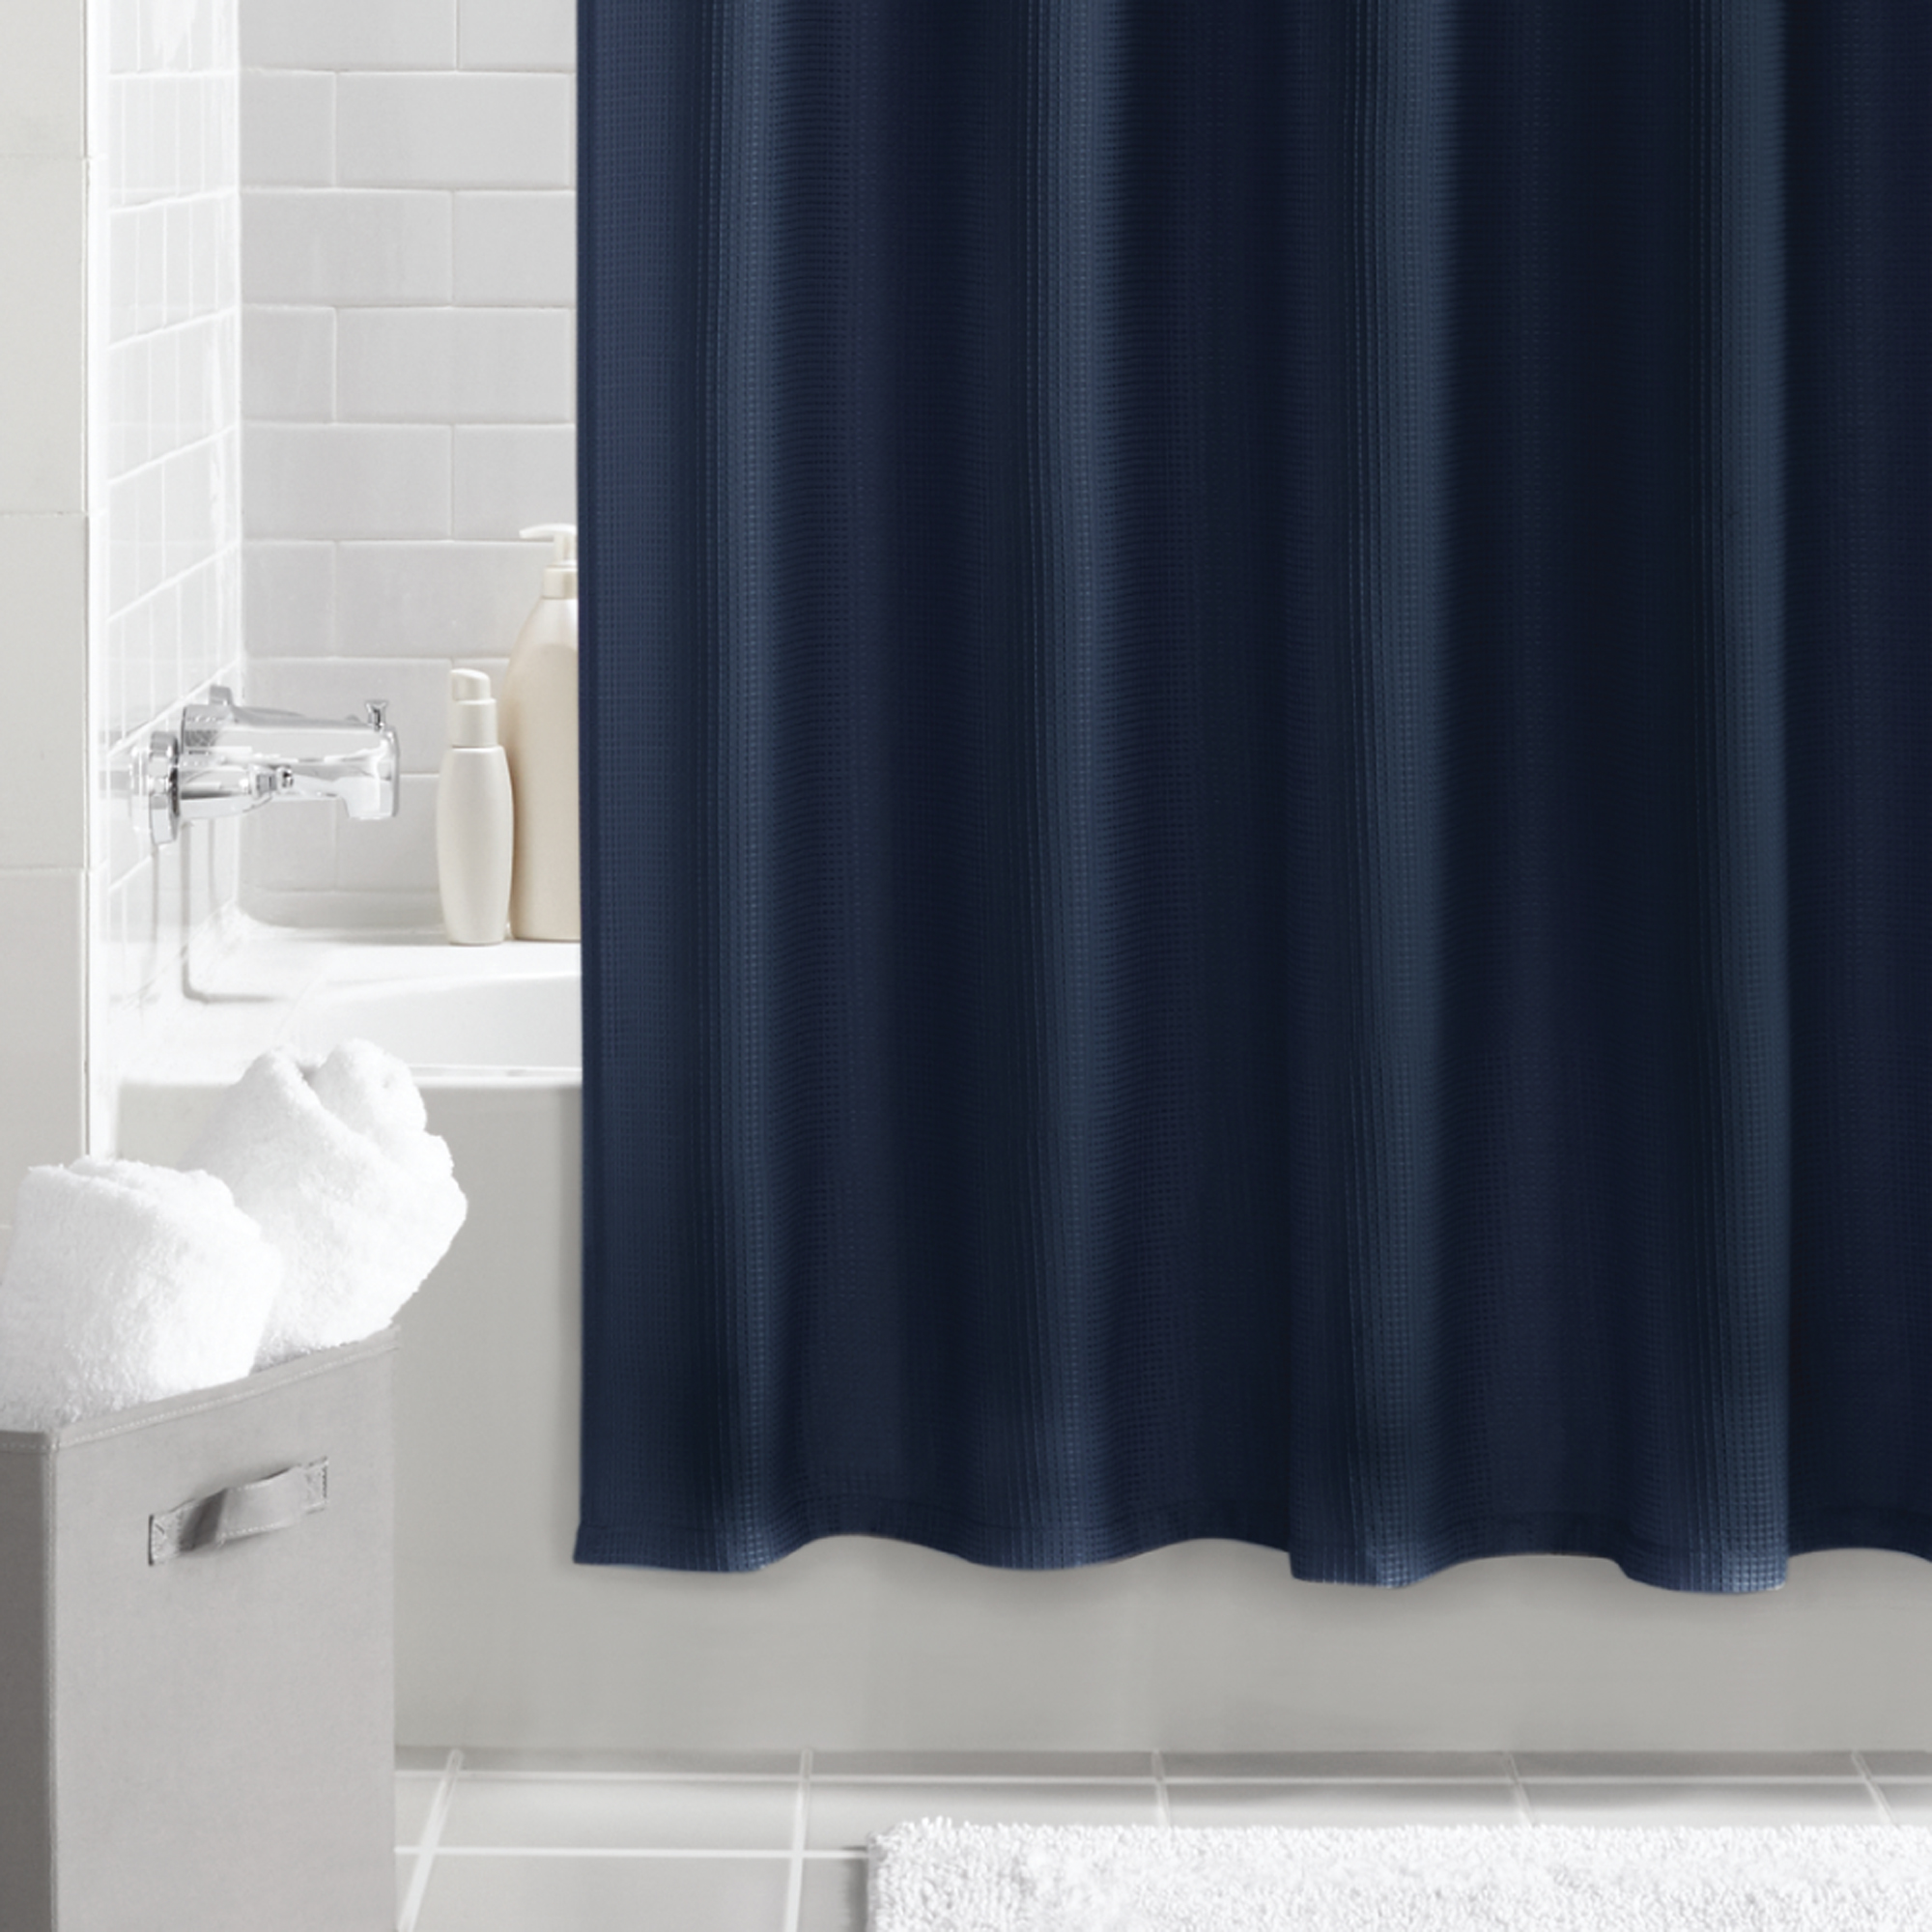 Navy Blue Fabric Shower Curtain, 70" x 72", Mainstays Classic Waffle Weave Pattern - image 5 of 5